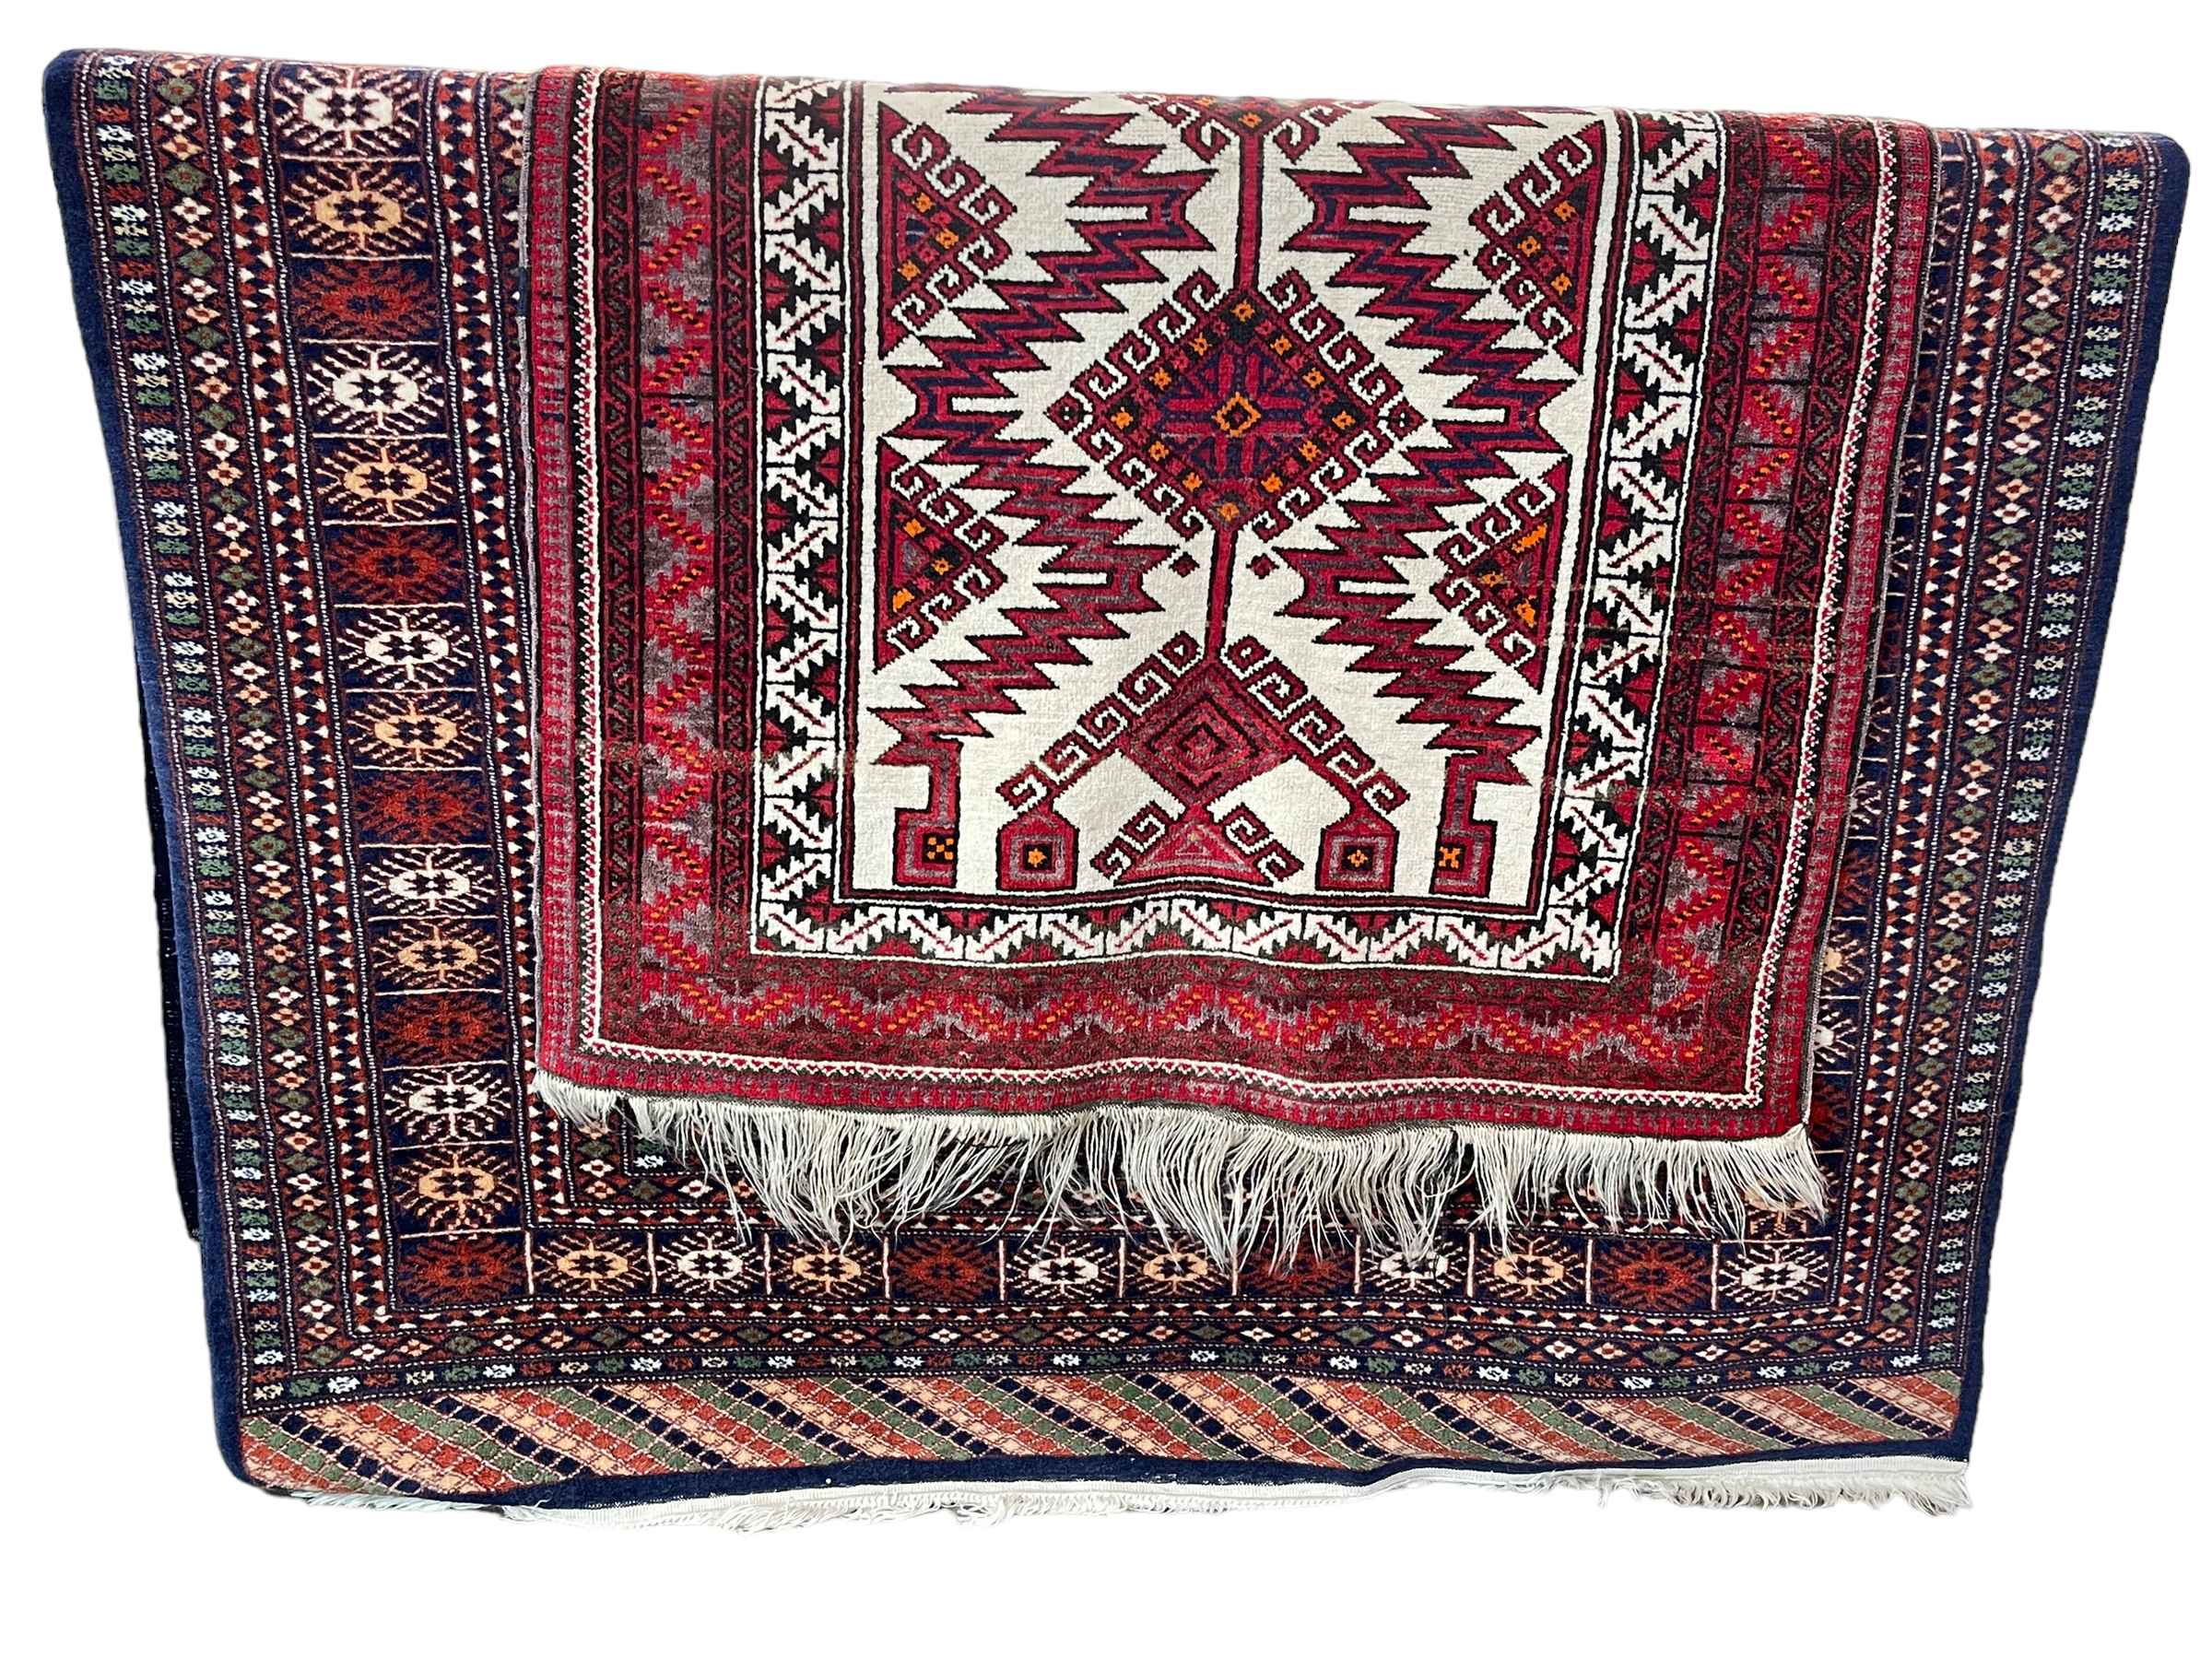 Bokhara style rug and Persian rug 2.00 by 1.27 and 1.50 by 0.85.